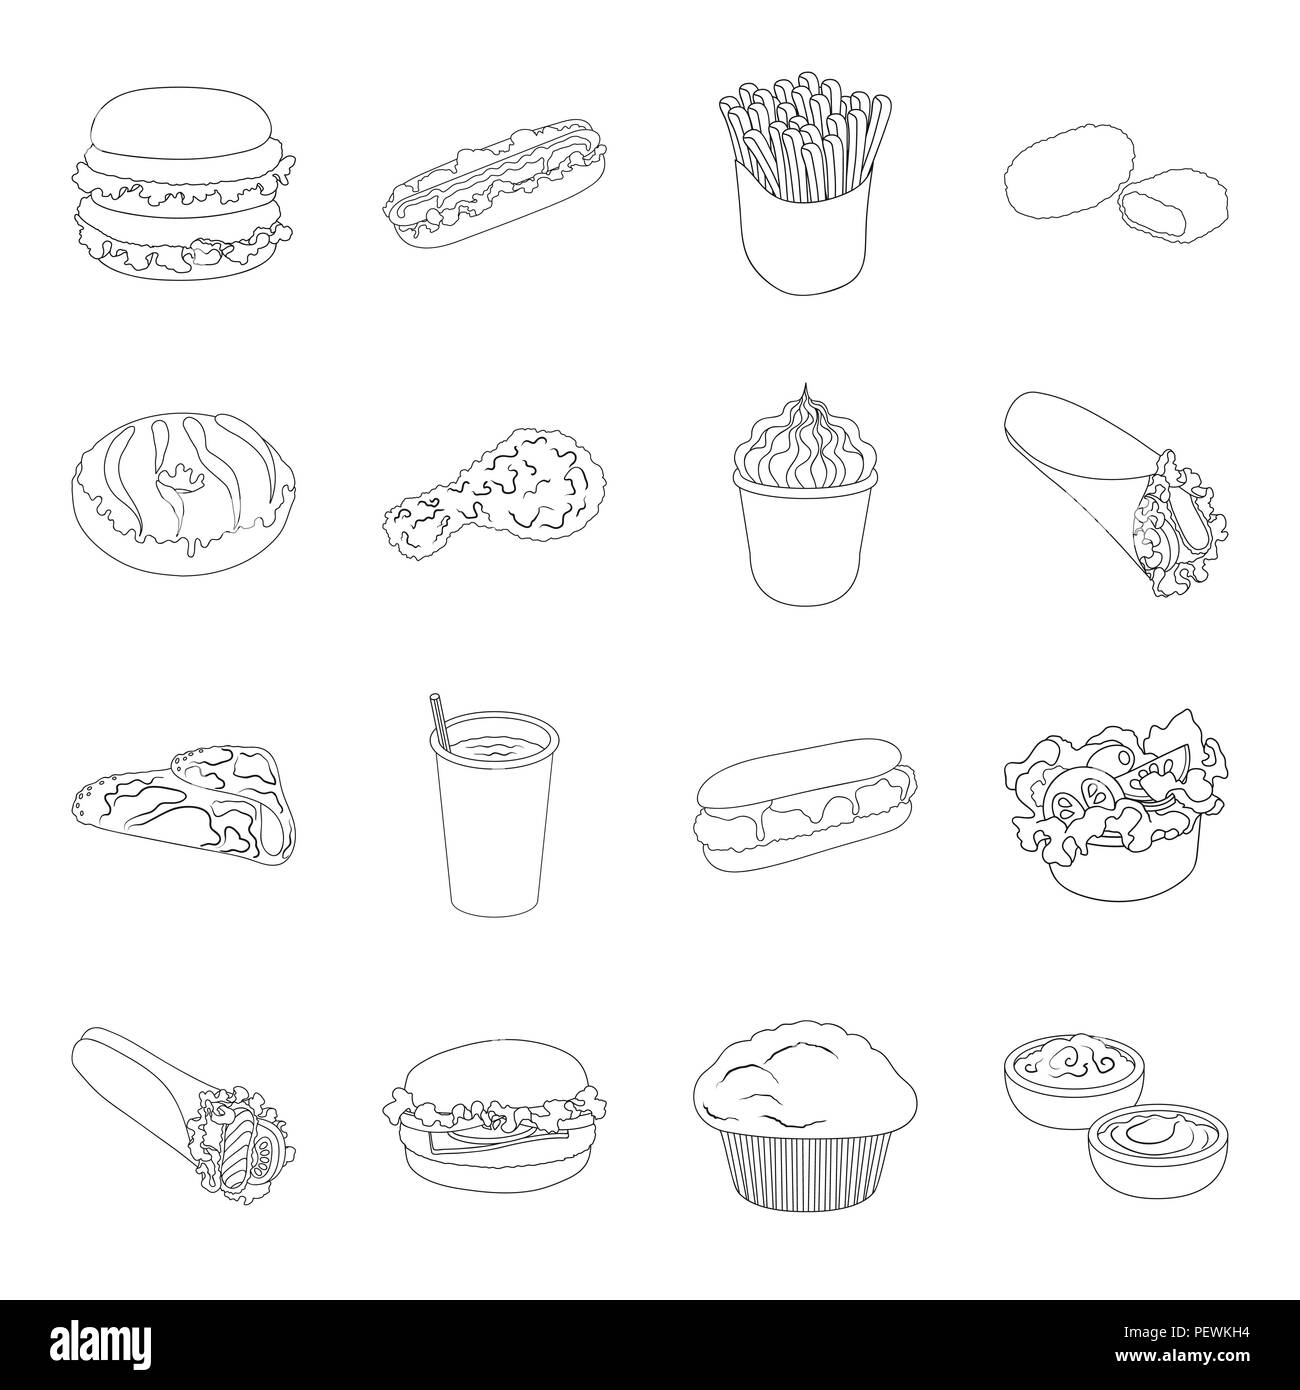 breakfast,burger,cafe,cake,chicken,coffee,collection,convenience,cooking,cream,design,dish,donut,fast,food,french,fries,ginger,ham,hamburger,hotdog,icon,illustration,ingredient,isolated,lavash,lettuce,logo,lunch,mustard,nuggets,outline,pancake,product,restaurant,roll,sausage,seasoning,semifinished,service,set,shawarma,sign,symbol,tomato,vector,web Vector Vectors , Stock Vector